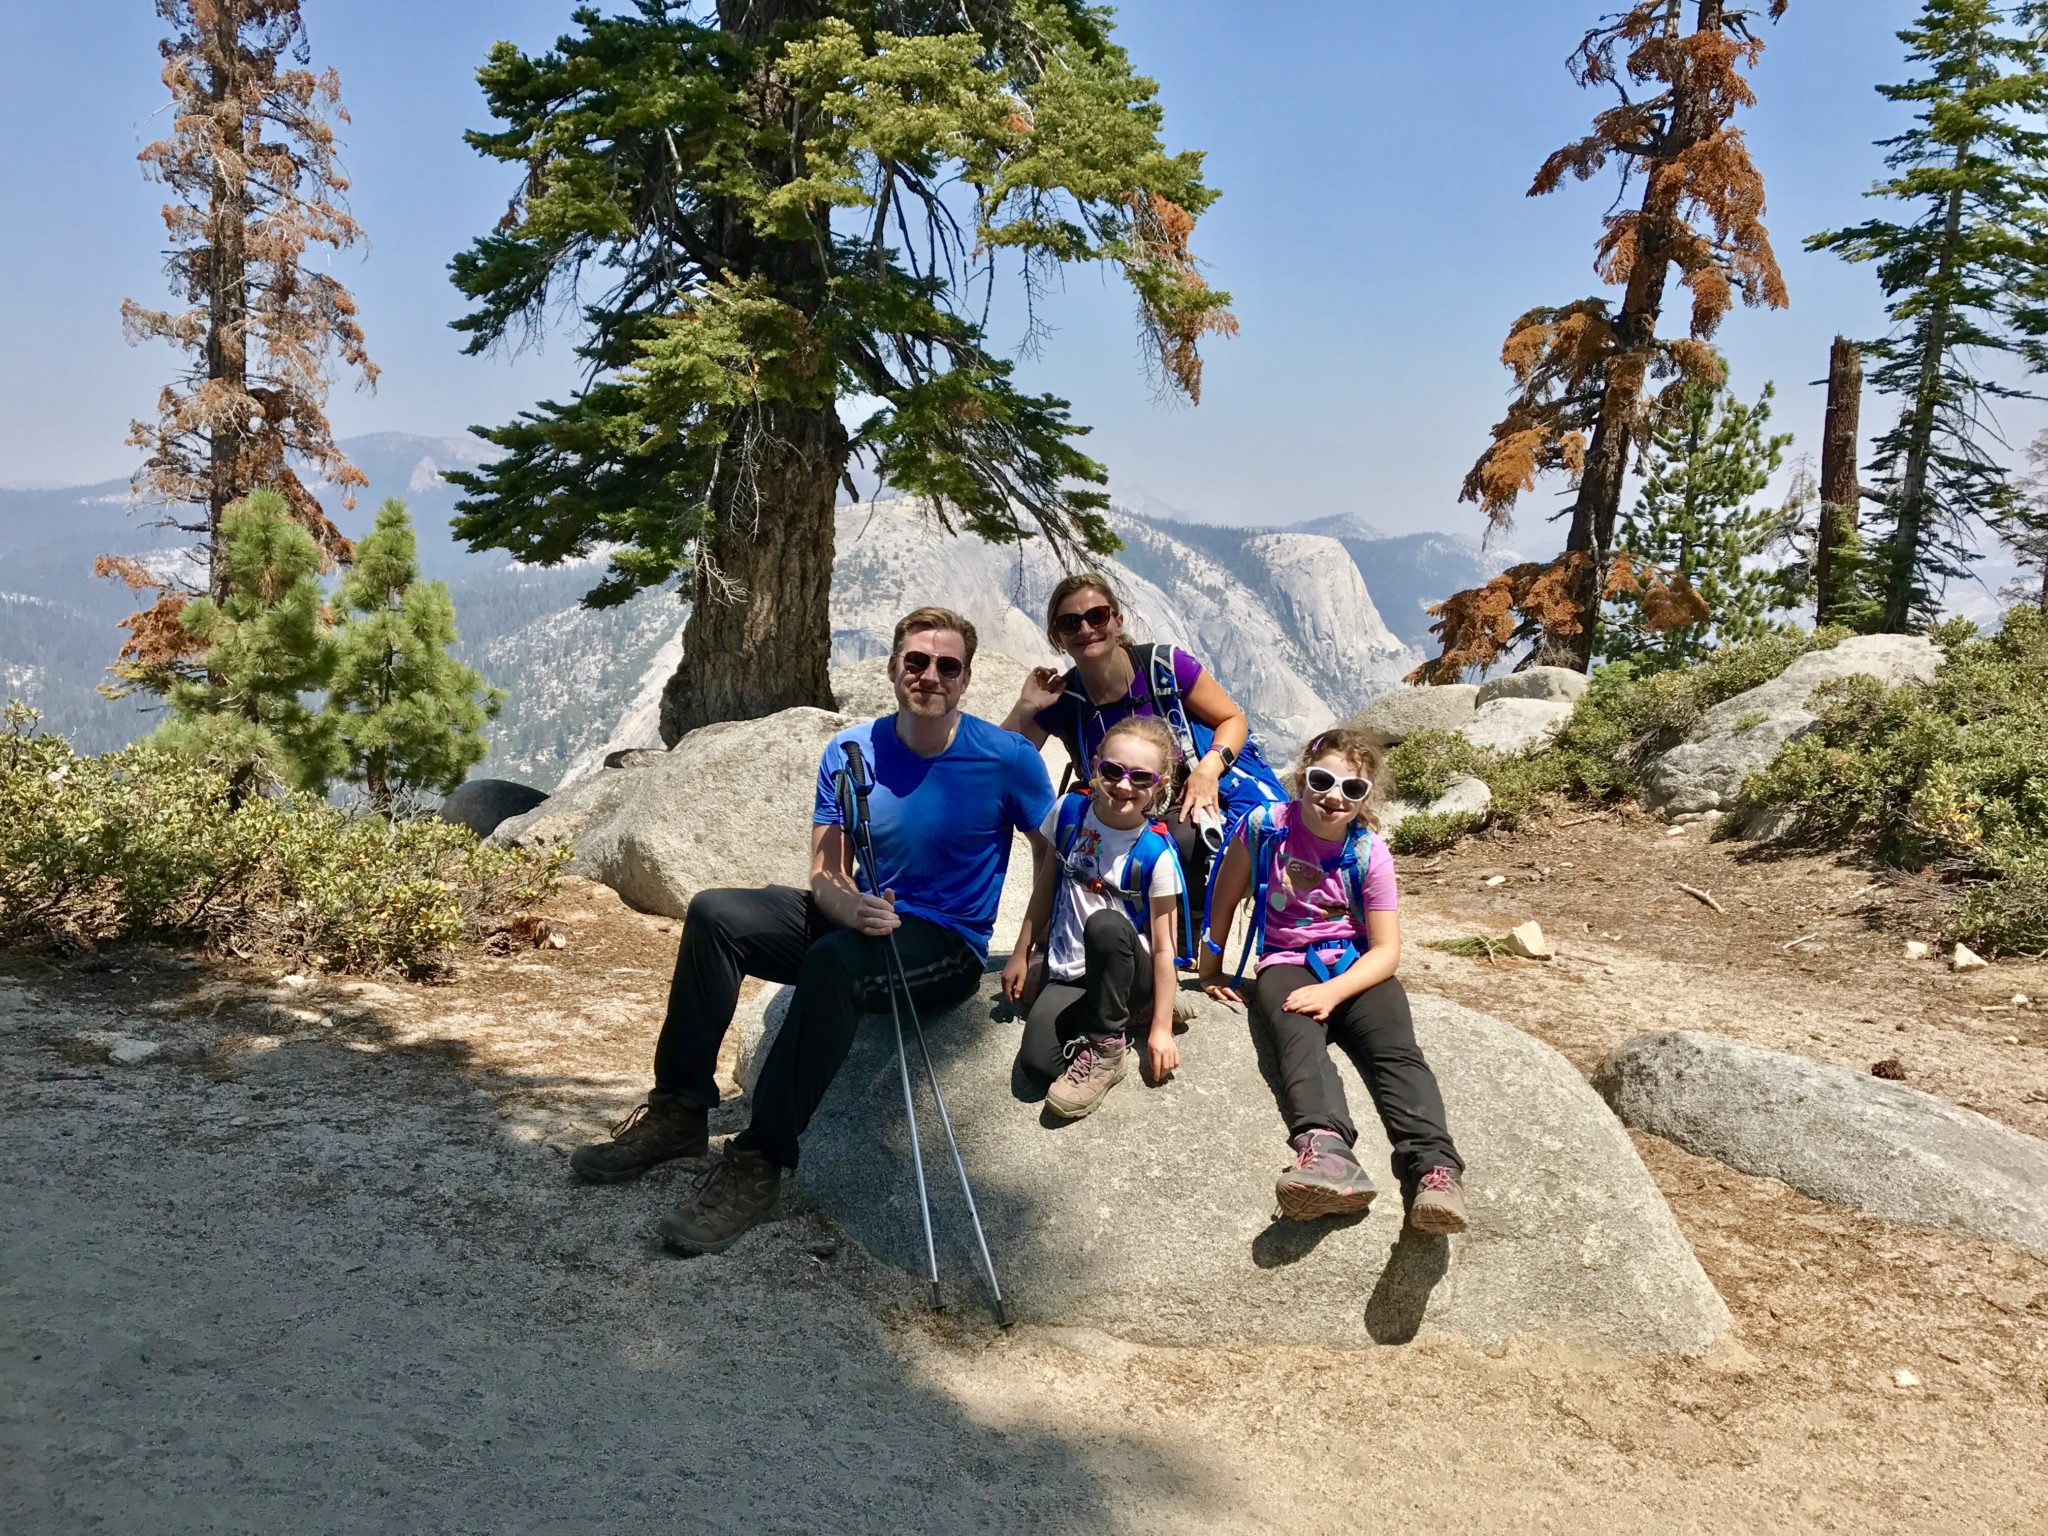 One of our family Yosemite photos on the way to Half Dome